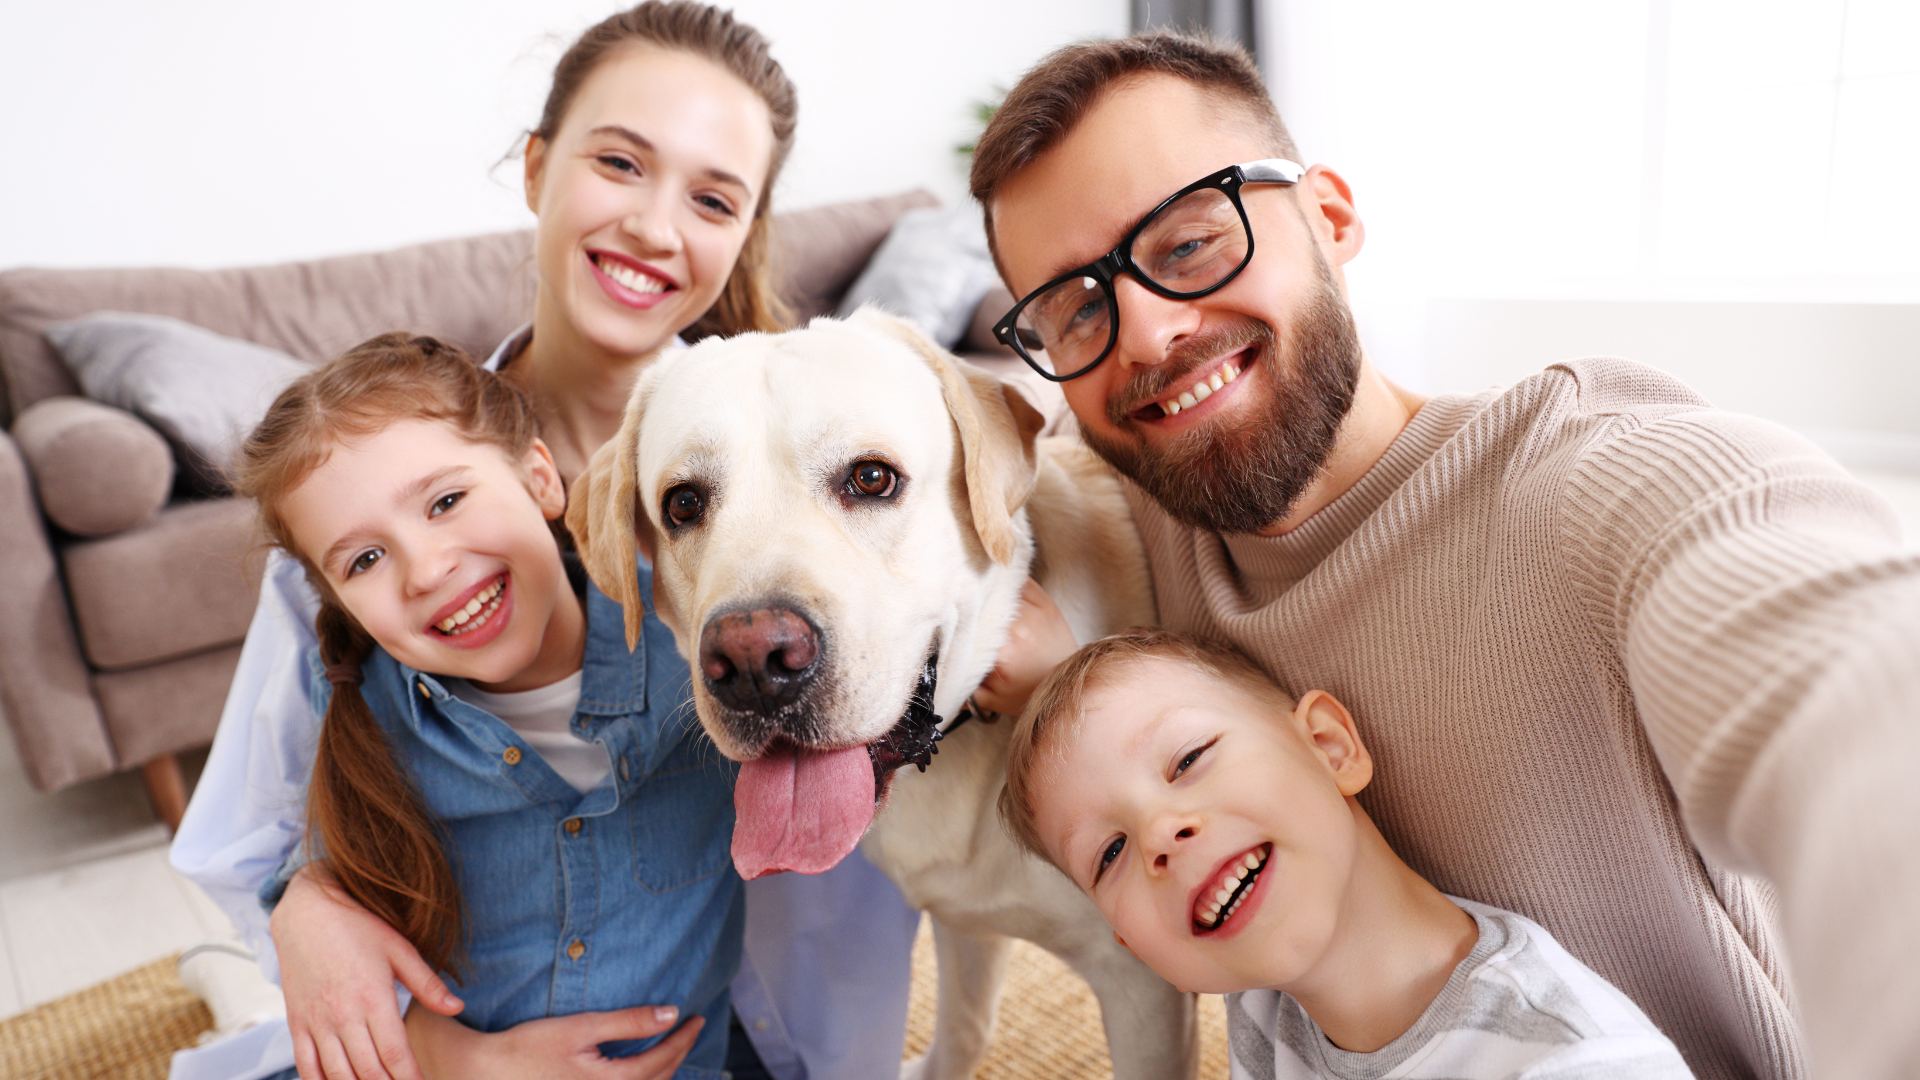 4 Ways Dogs Can Aid Autistic People Man’s best friend has been by our side for over 10,000 years. In that time, dogs have taken on many different roles to serve their human companions. From hunting and flushing, herding, and guarding livestock, to being the family pet who provides companionship. In more recent years dogs […]